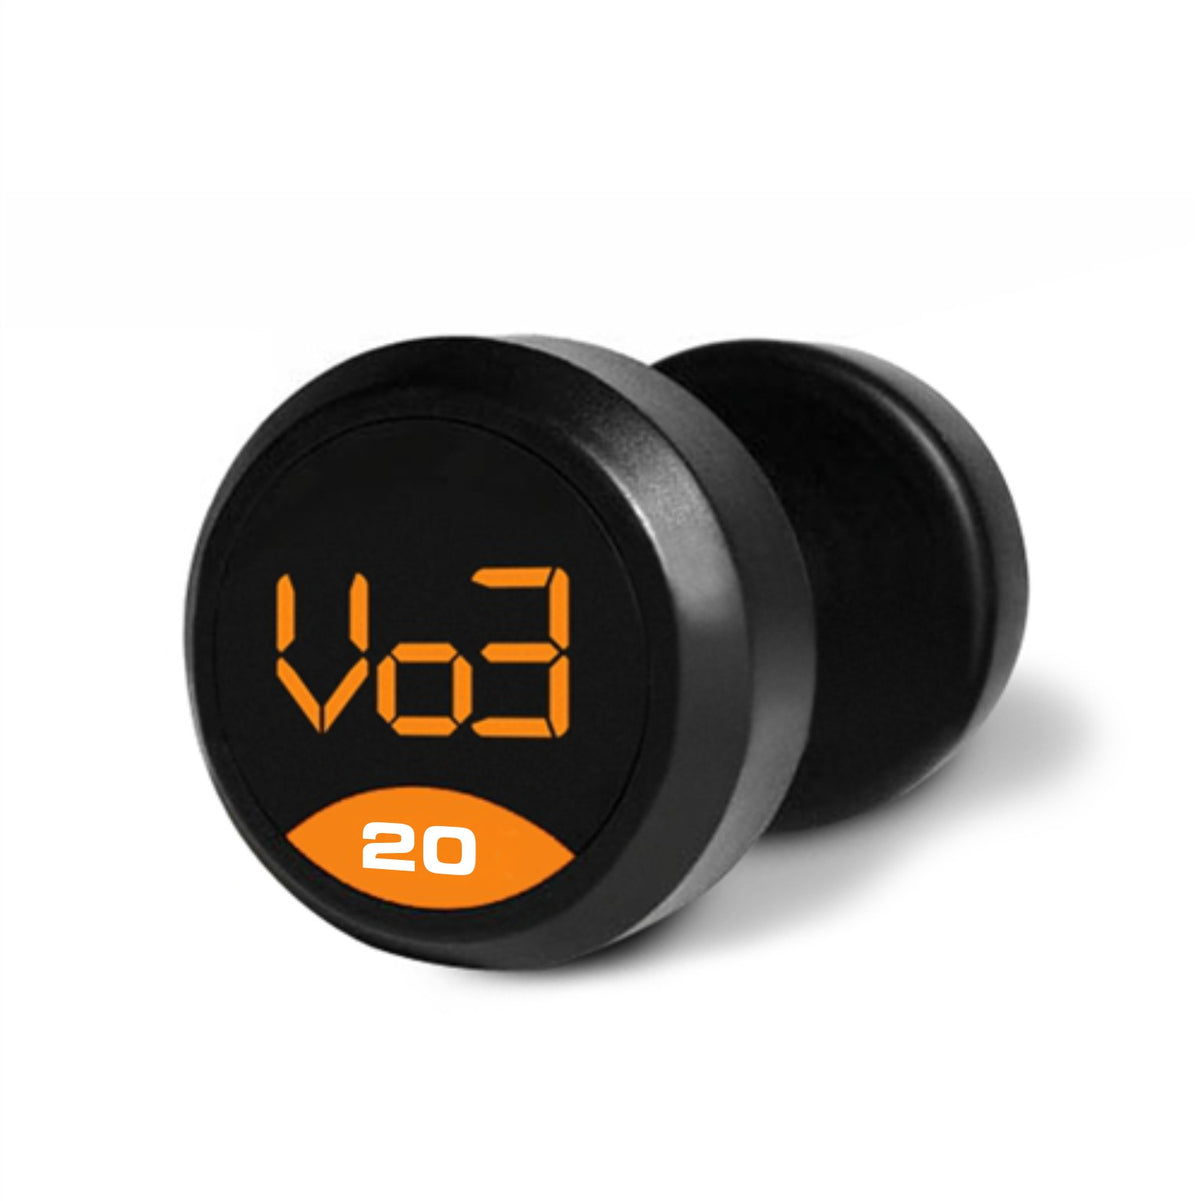 Dumbbells - Vo3 Round Rubber End